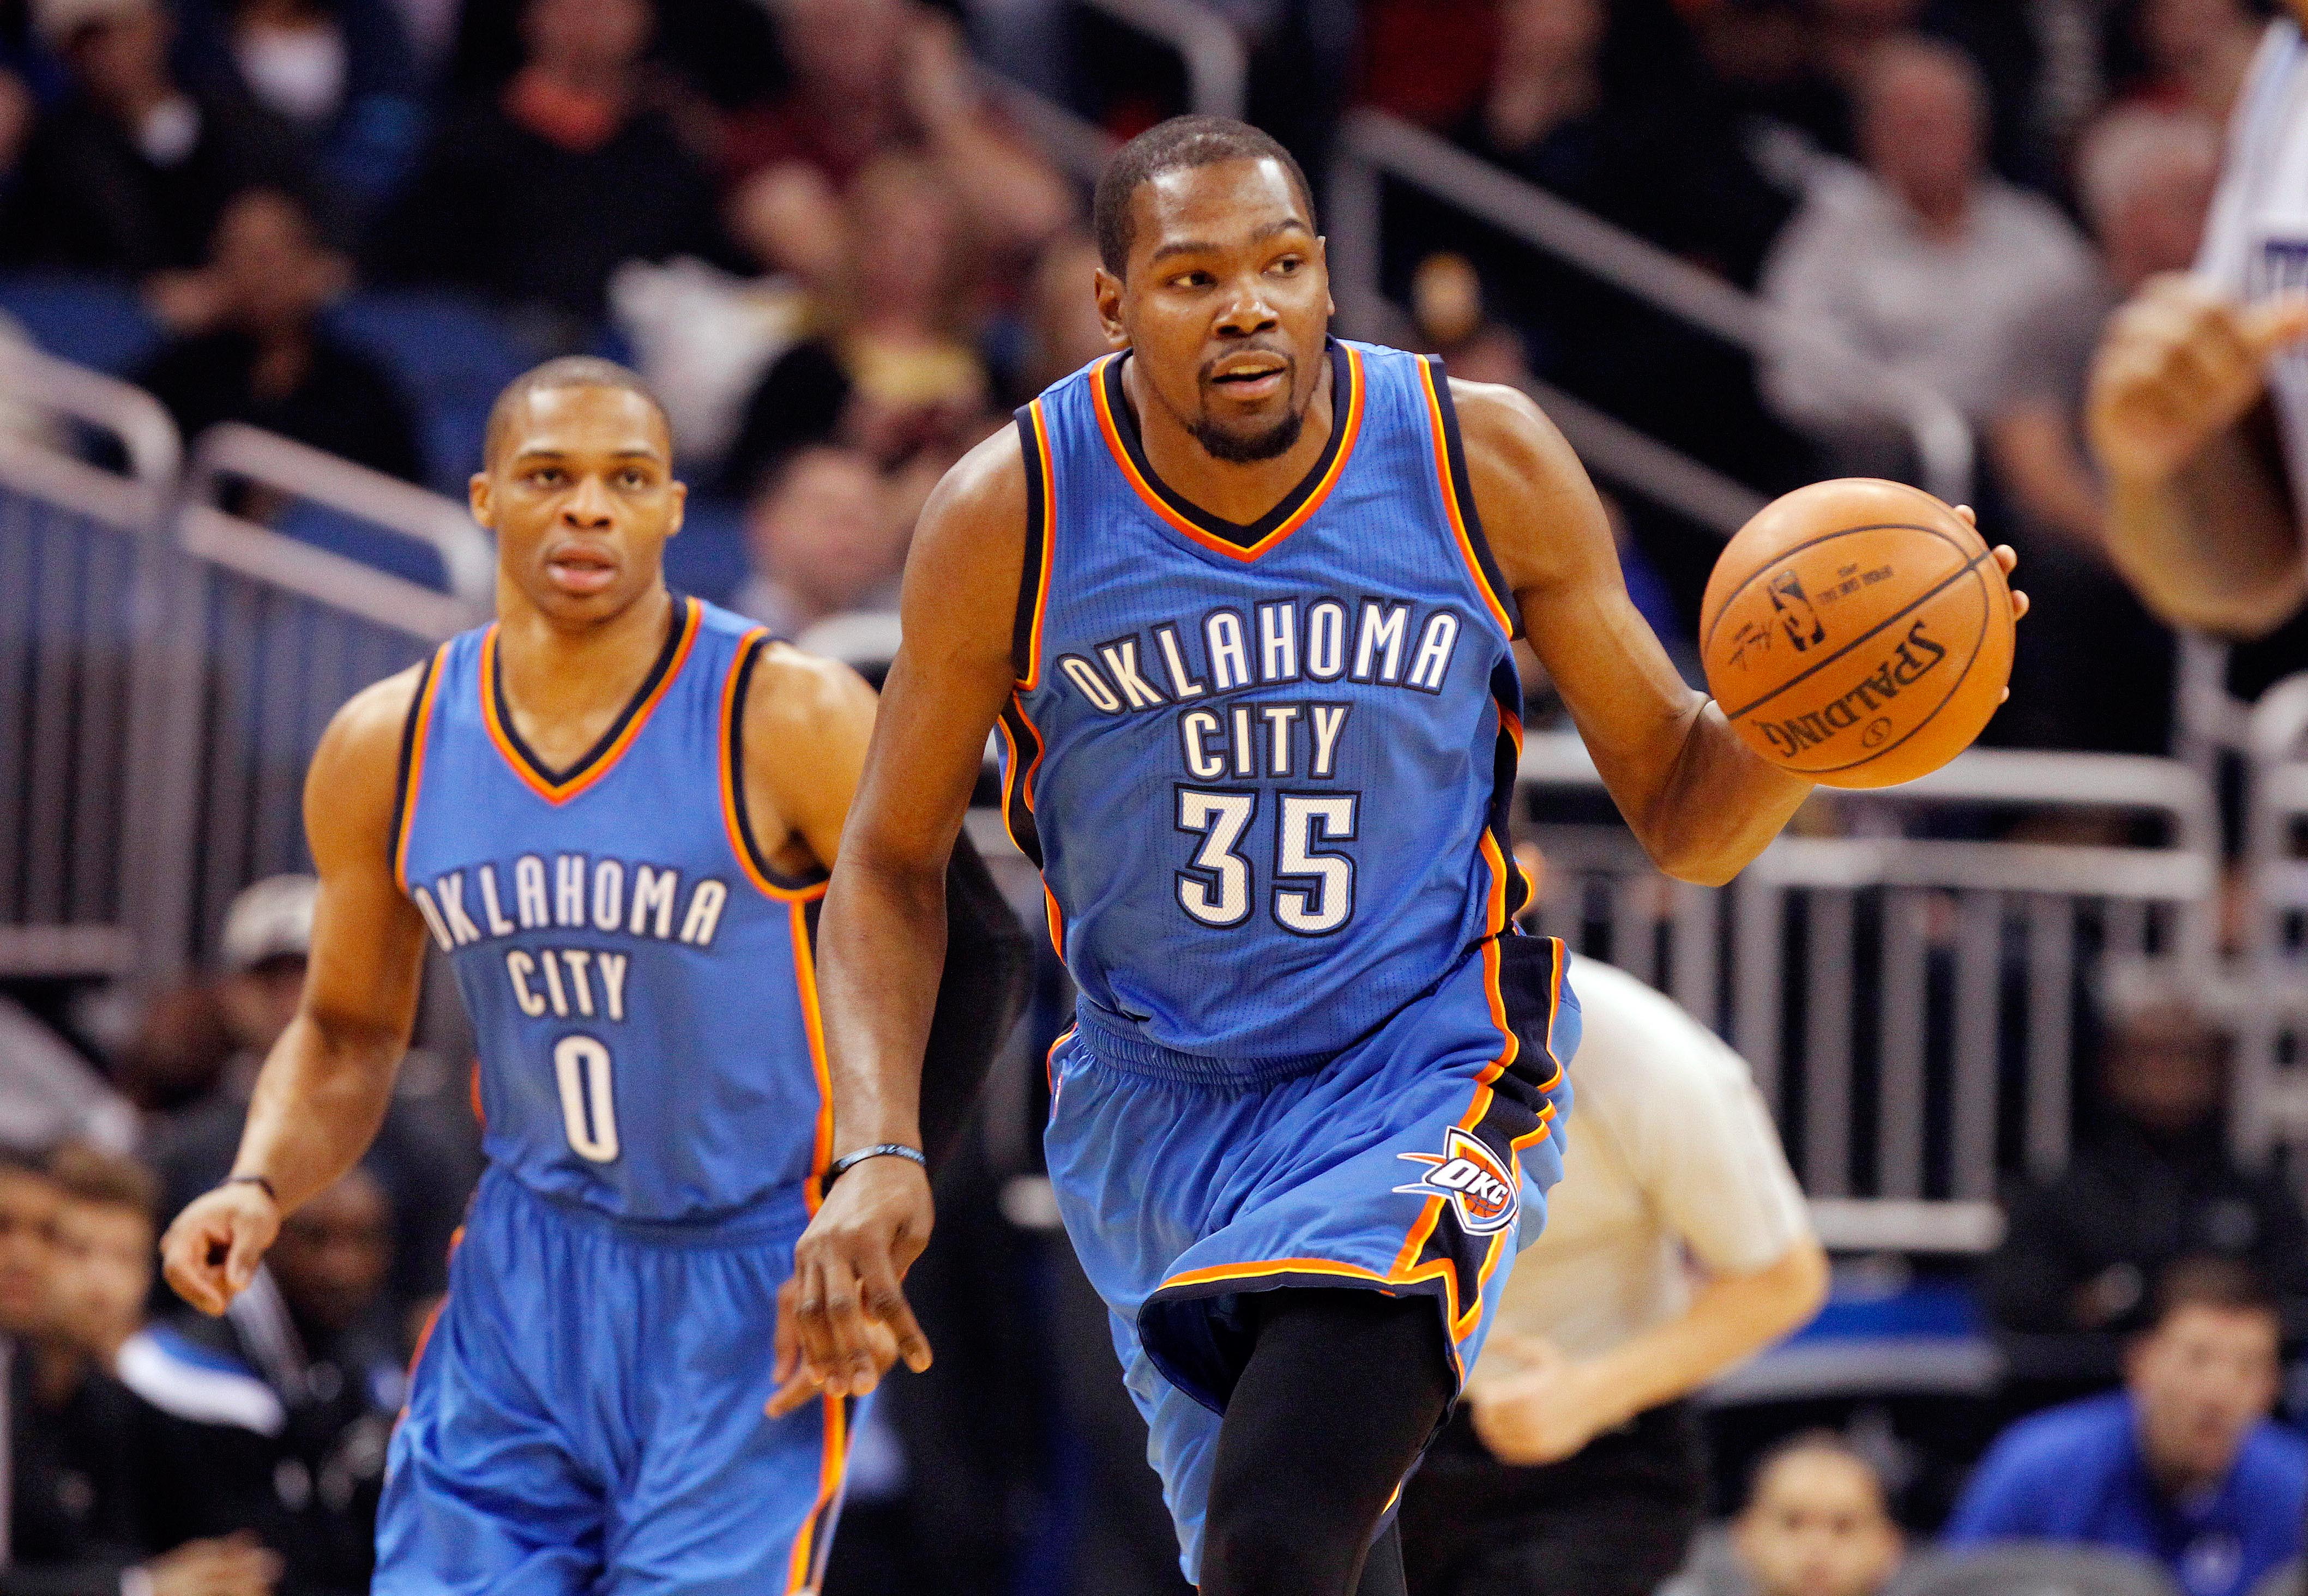 Jan 18, 2015; Orlando, FL, USA; Oklahoma City Thunder forward Kevin Durant (35) dribbles the ball as guard Russell Westbrook (0) runs behind during the first quarter against the Orlando Magic at Amway Center. (Kim Klement-USA TODAY Sports)